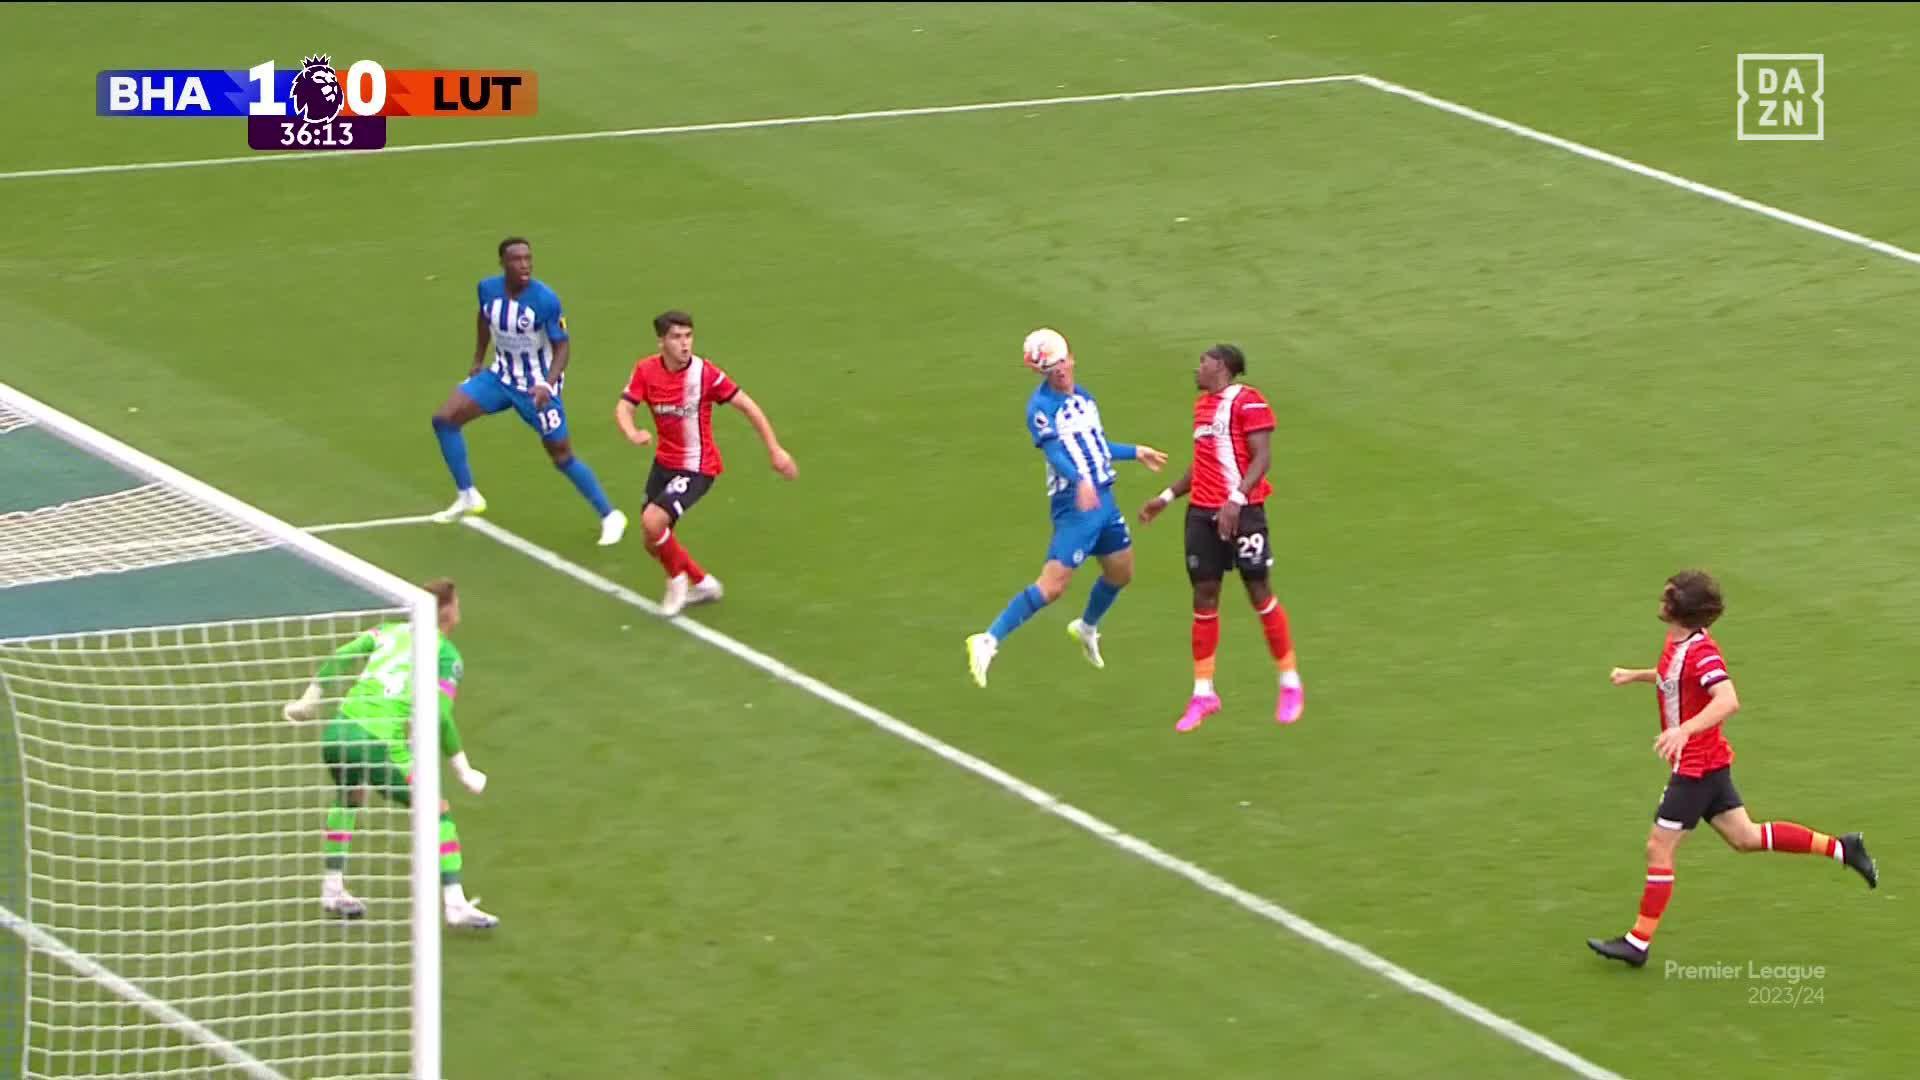 March’s header gives Brighton’s lead v. Luton Town